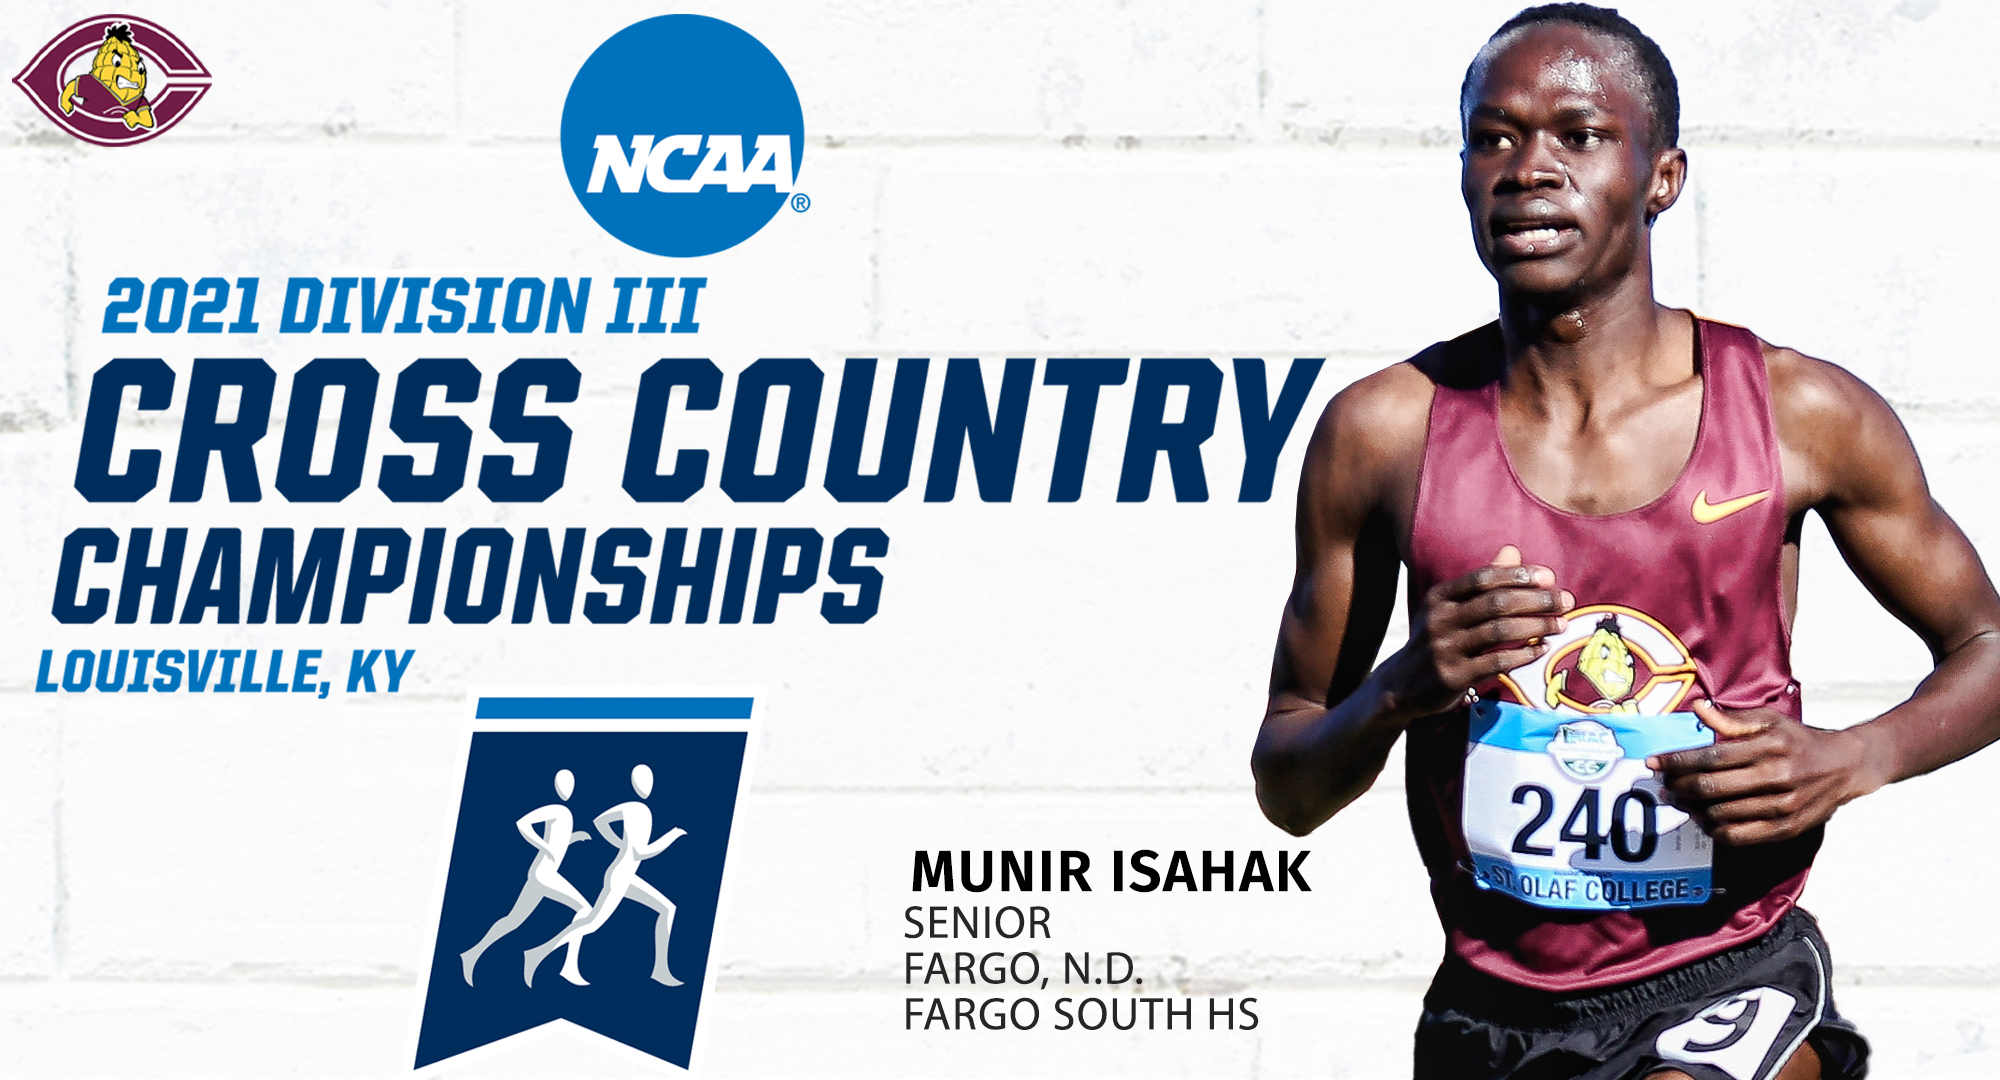 Munir Isahak was extended one of the at-large individual bids for the NCAA Championship Meet. He is the first CC athlete to qualify since 2011.